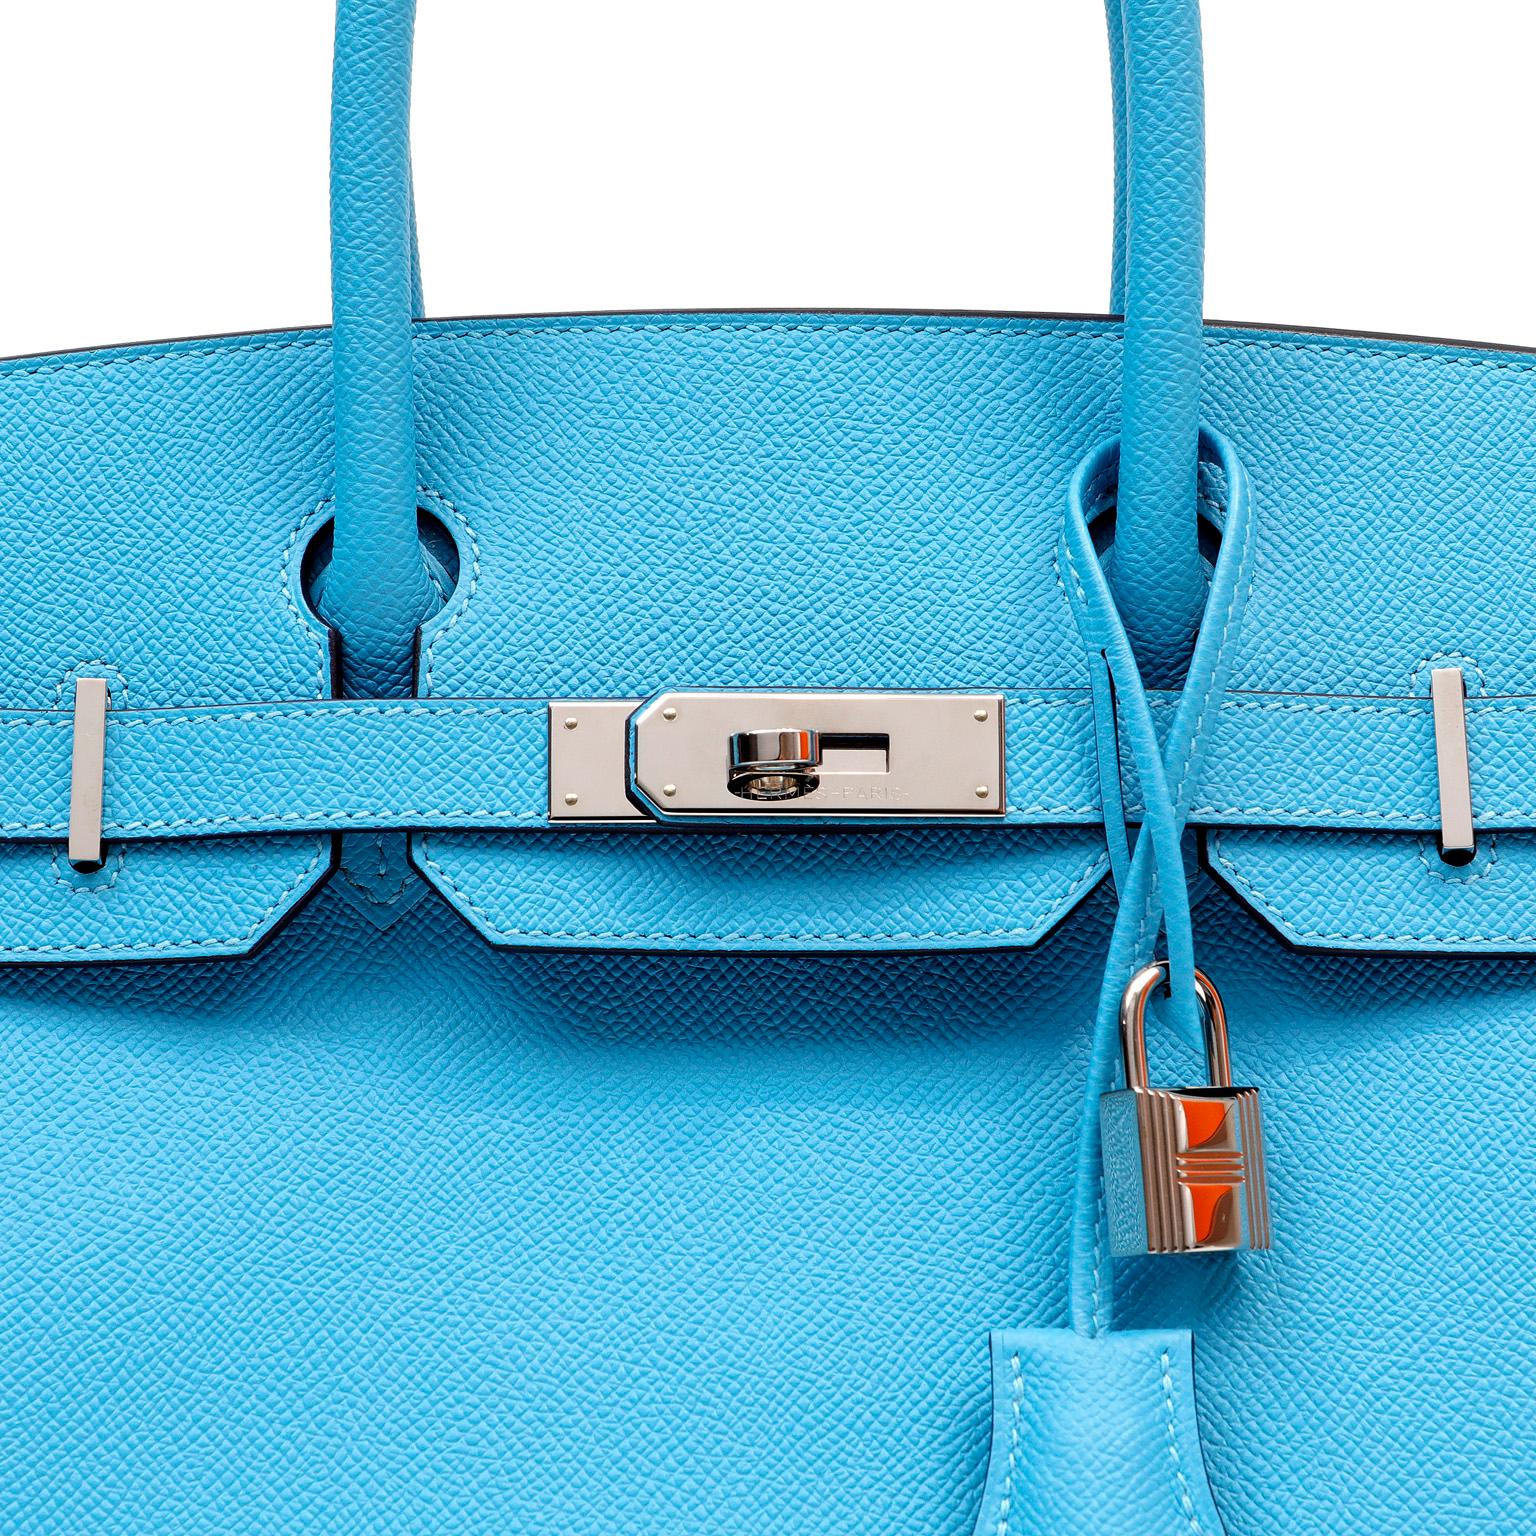 This authentic Hermès Sky Blue Epsom 30 cm Birkin is in pristine condition.  Hand sewn and coveted worldwide; the Hermès Birkin is considered the epitome of luxury handbags.  Vivid Cotton Candy Blue from the 2020 collection is perfectly paired with